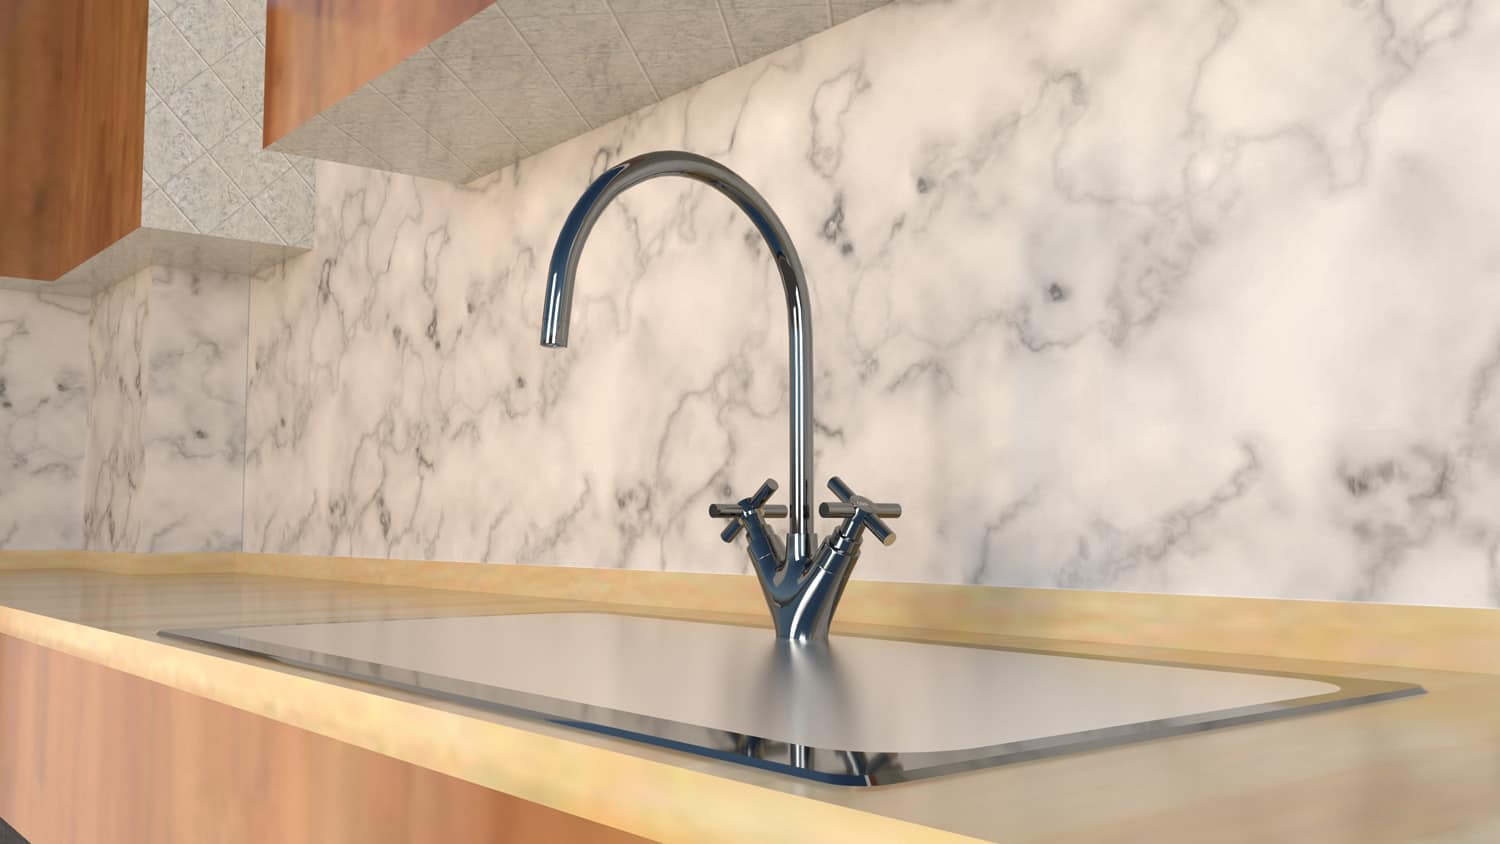 Sink in chrome color, included in kitchen base units with light wood finishes, with cover for the water well and wall finished in marble and warm light